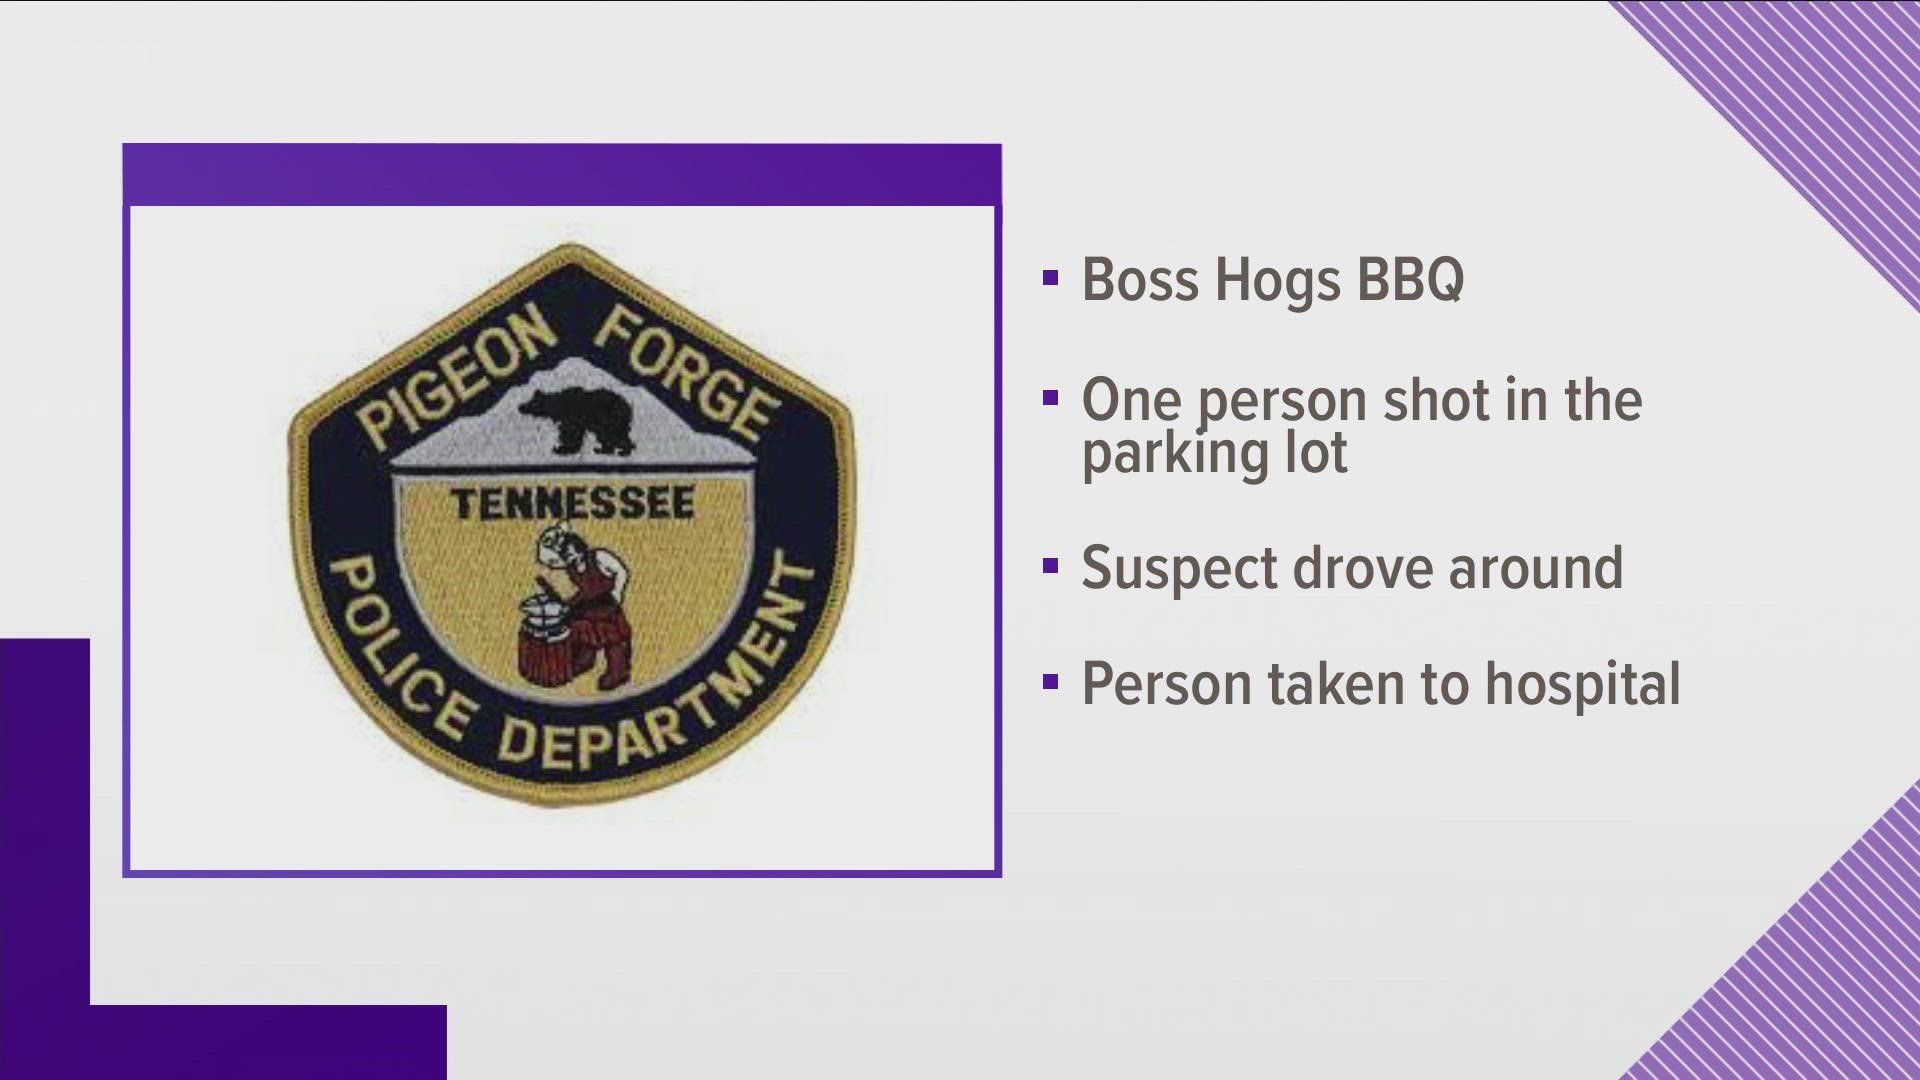 Police said the shooting wounded one person in the parking lot of Boss Hogs BBQ Tuesday night.